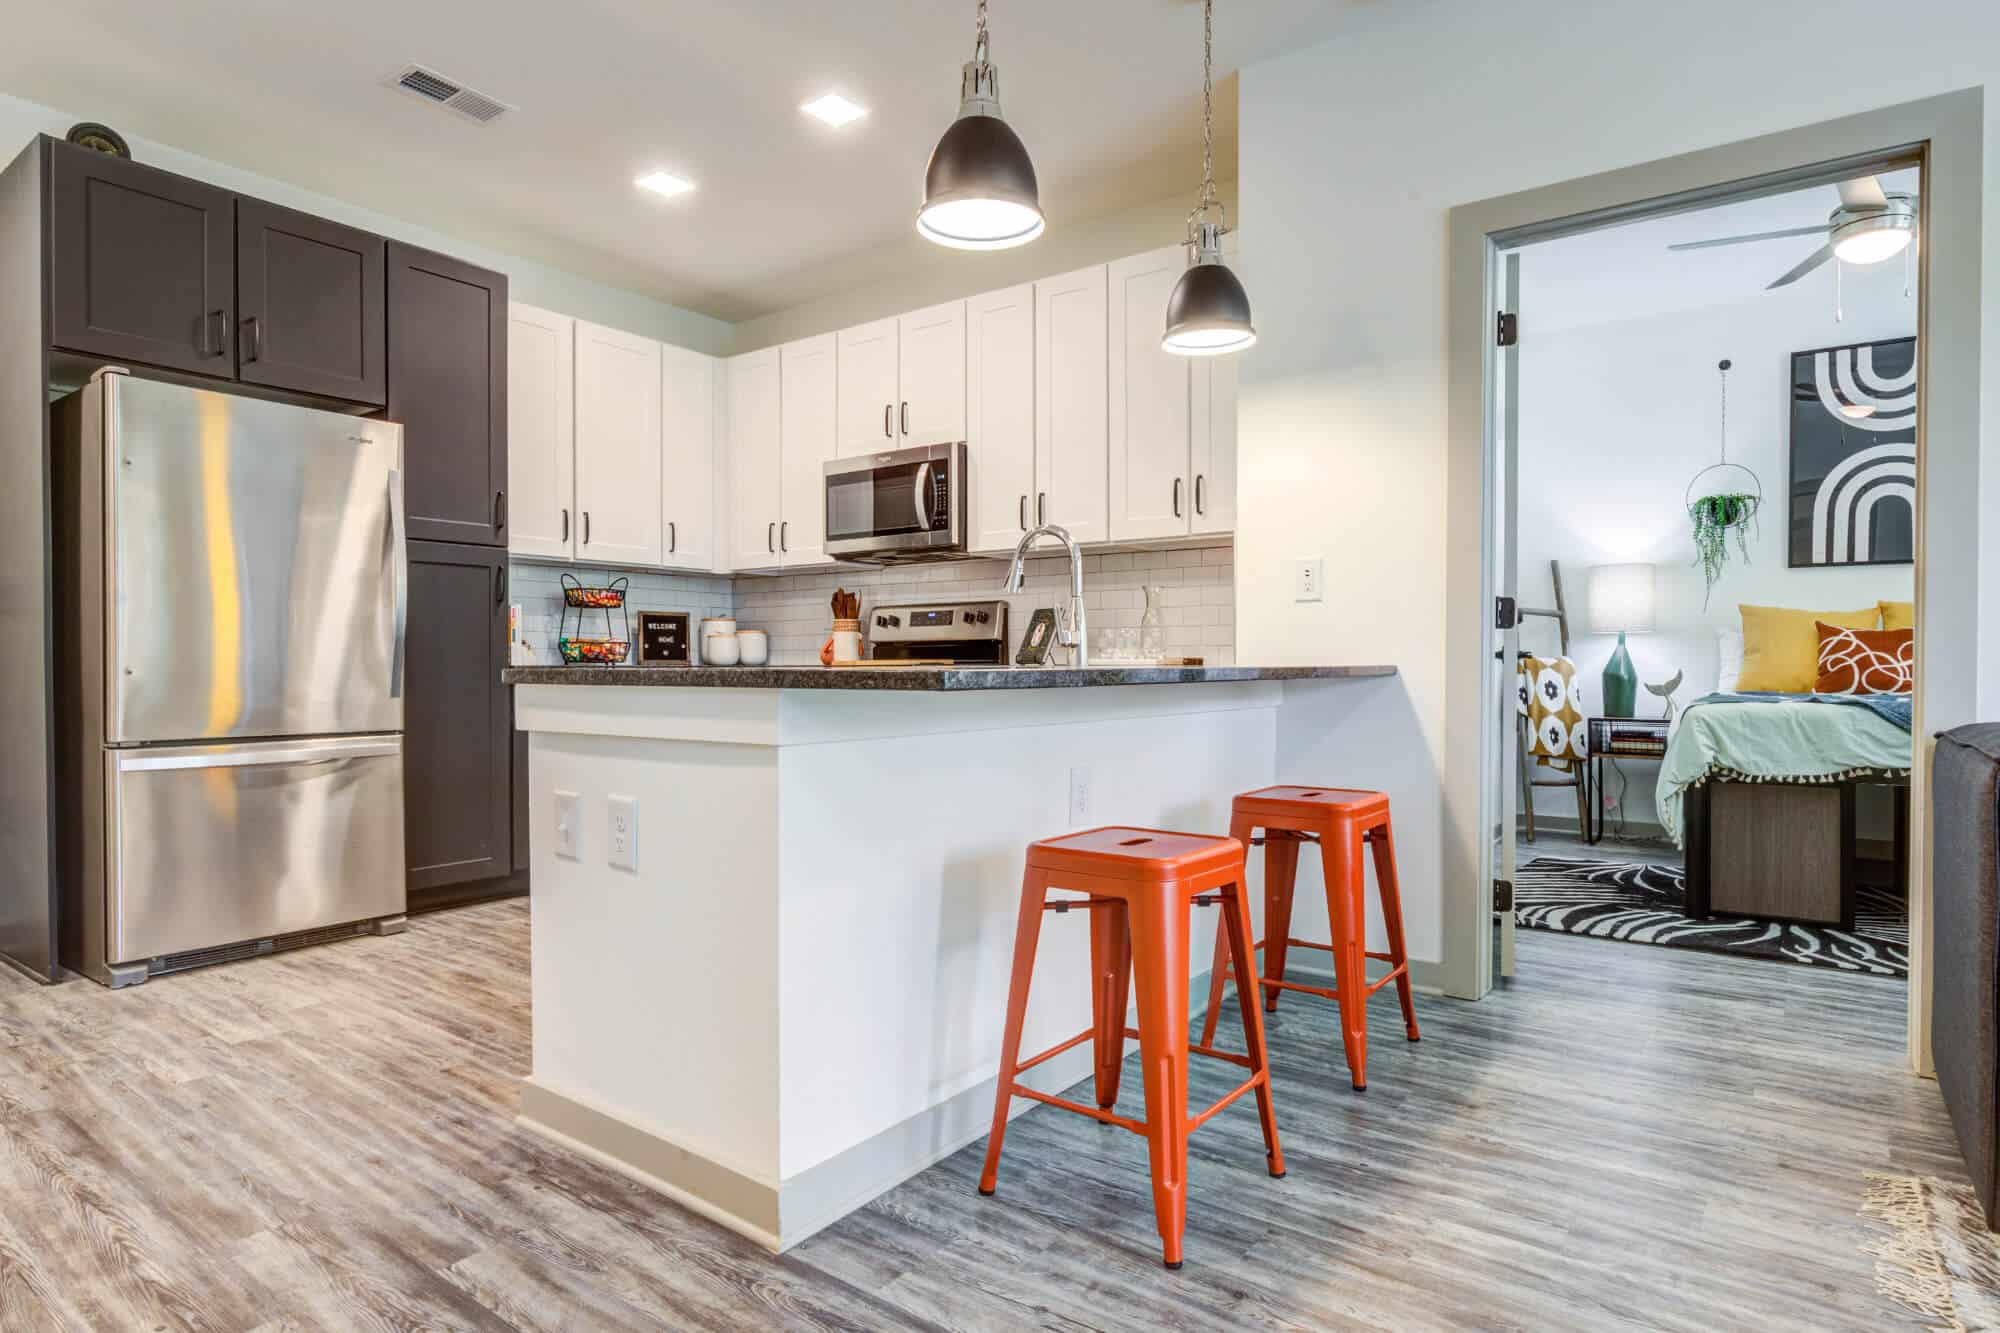 signature hartwell village off campus apartments near clemson university fully furnished apartments plank wood flooring kitchen with bar stool seating